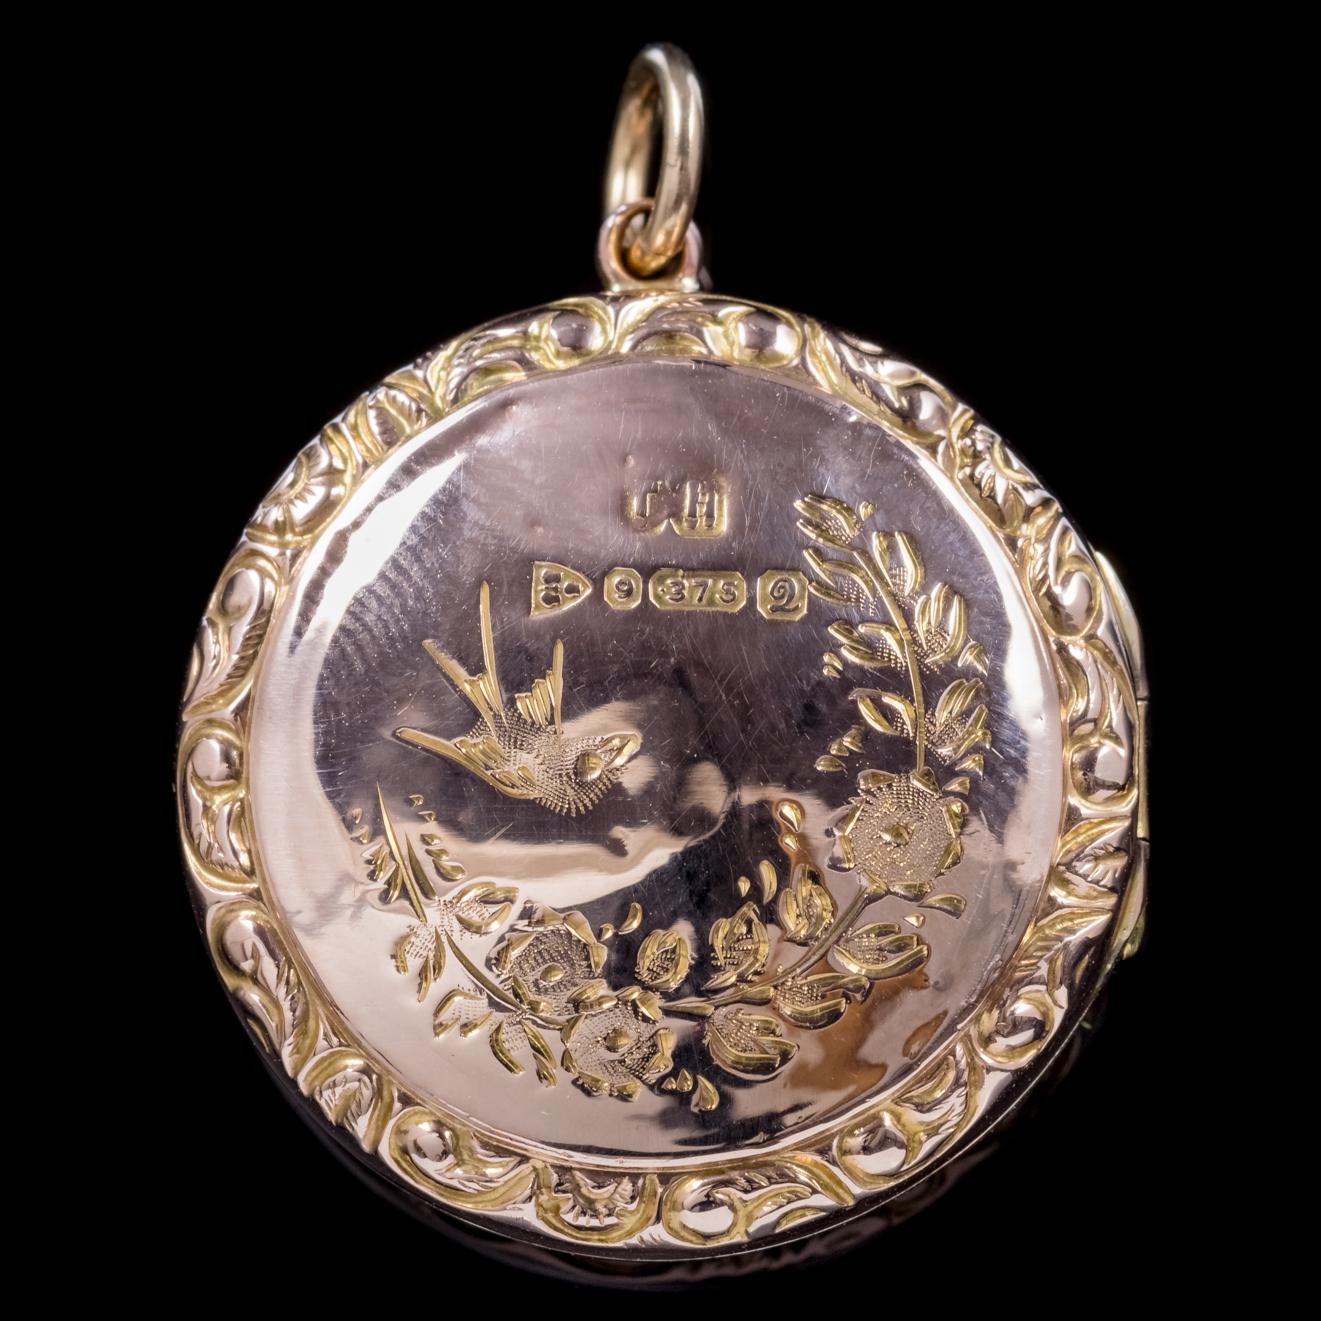 This fabulous little antique Victorian locket is fully hallmarked and dated Chester 1916.

The piece features a lovely engraved border with an image of a swallow and flowers on the front and back. 

Swallows are known to mate for life and therefore